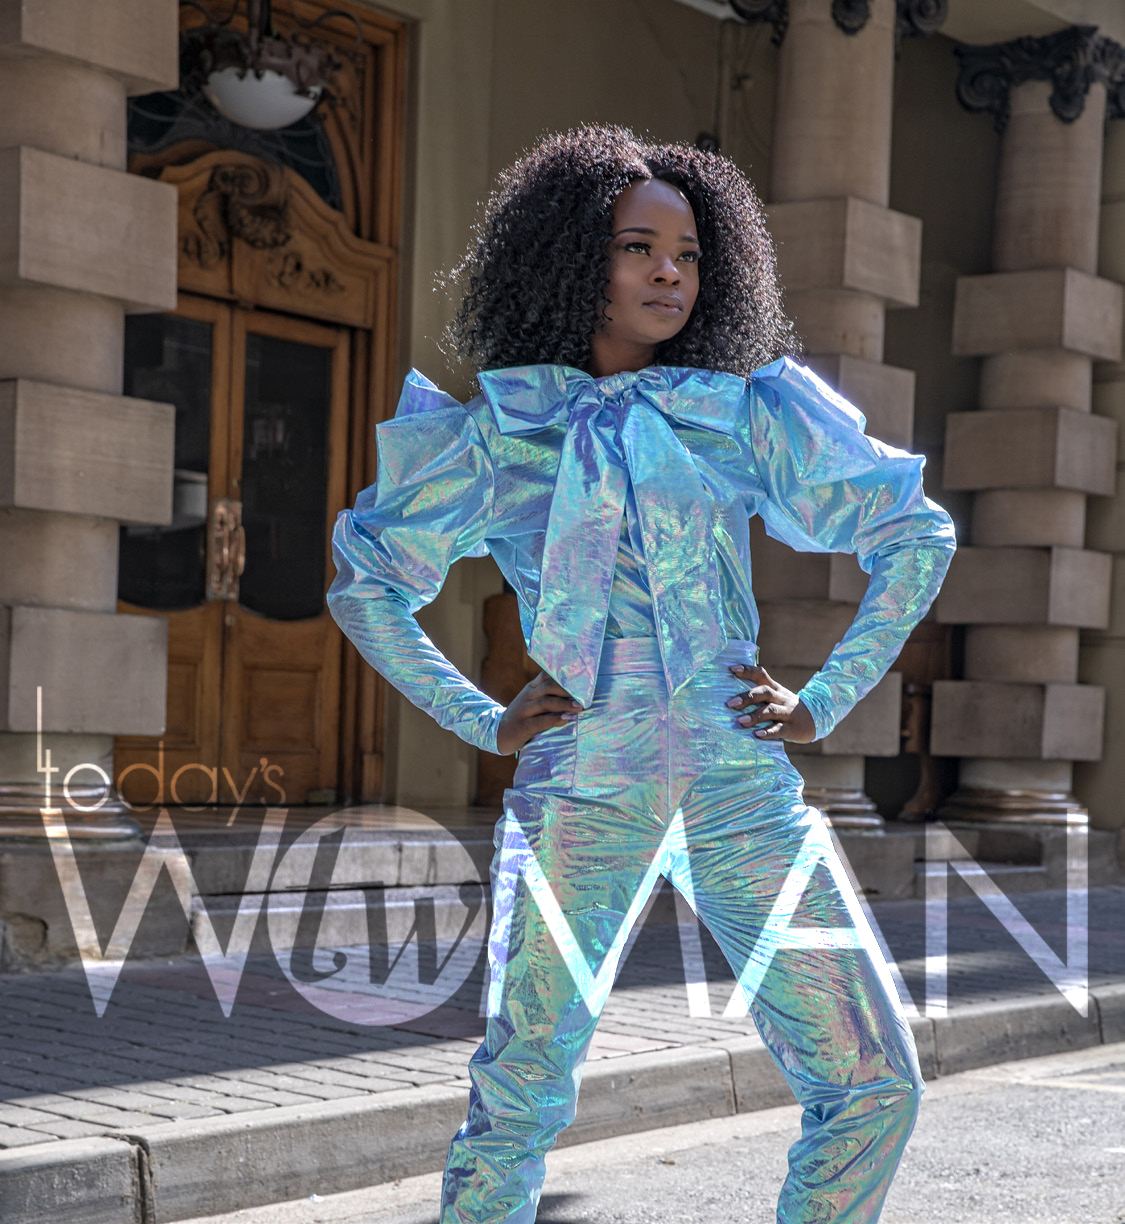 You Need To See Olajumoke Orisaguna In This Editorial With David Tlale & Reze Bonna!